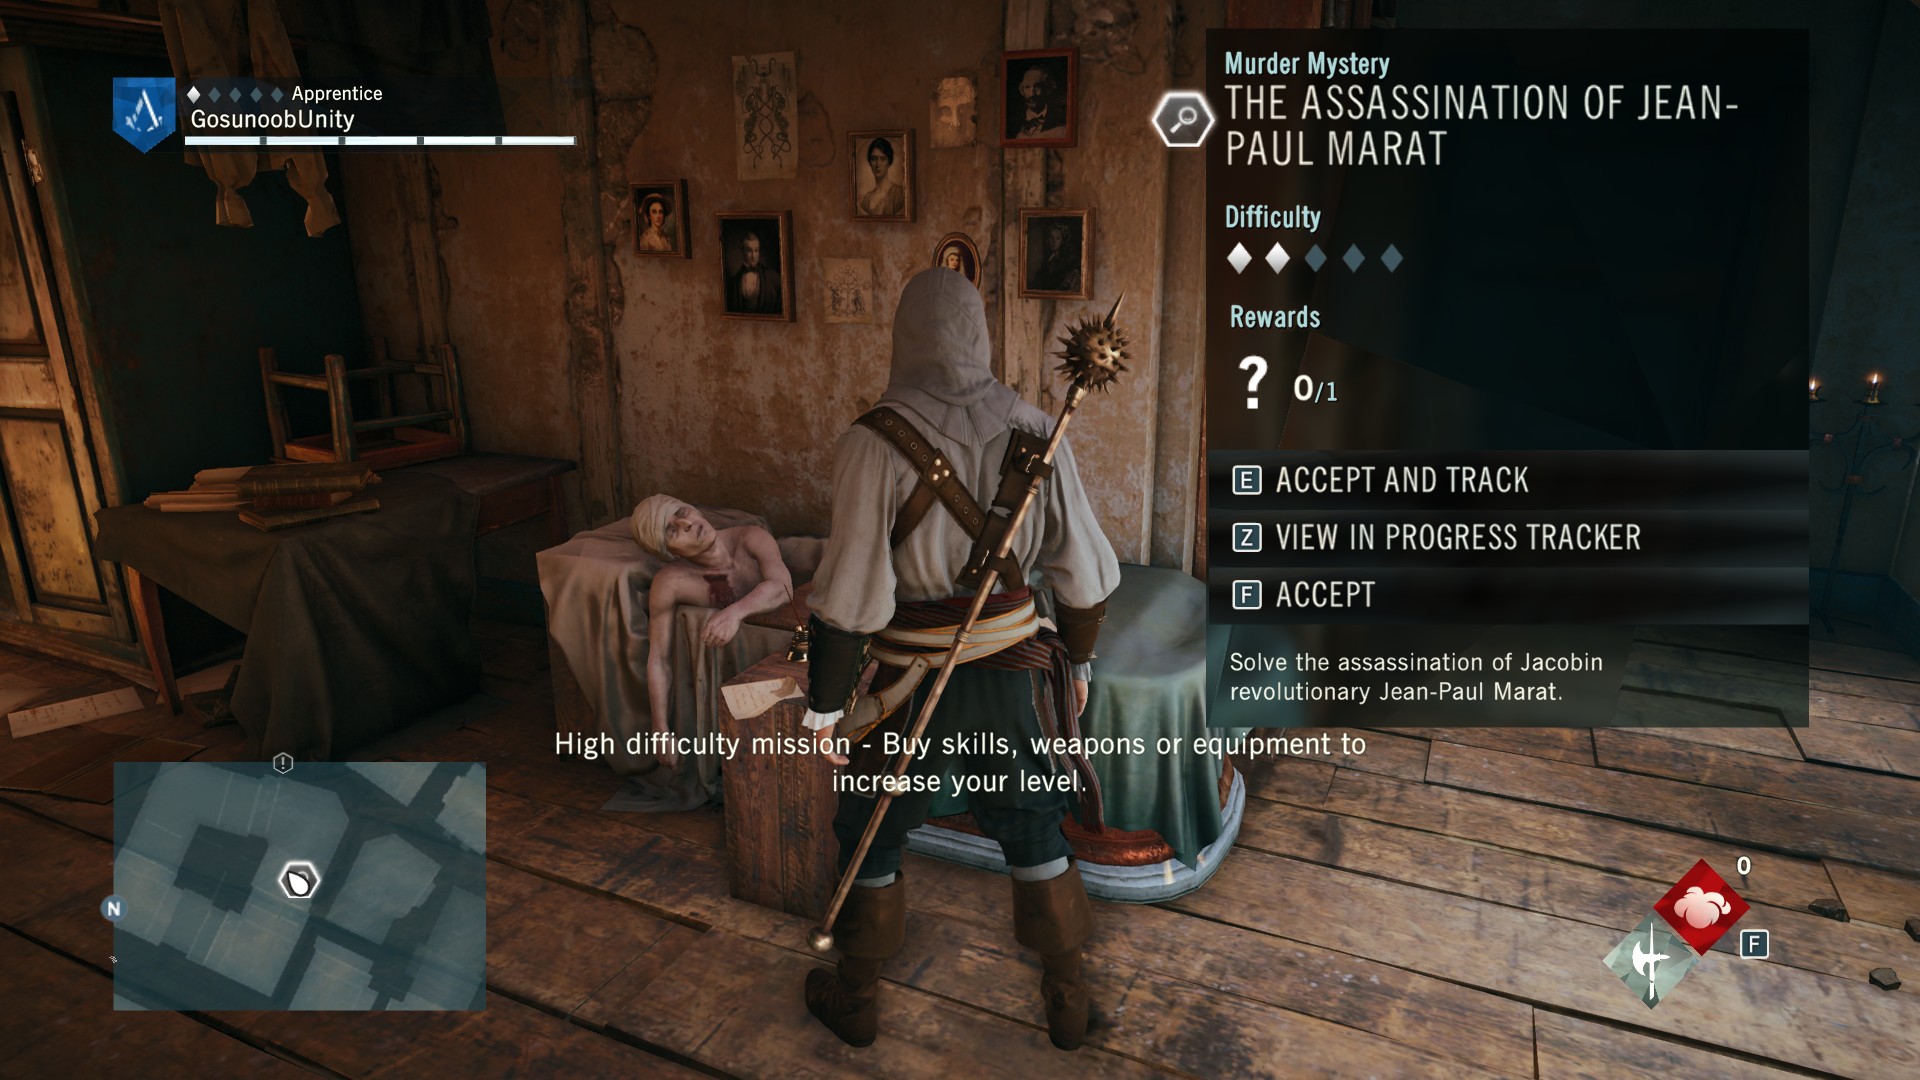 Assassin's Creed Unity Murder Mystery Guide + Location & Solution - The Assassination of Jean-Paul Marat ⧫⧫◊◊◊ - F8296C1